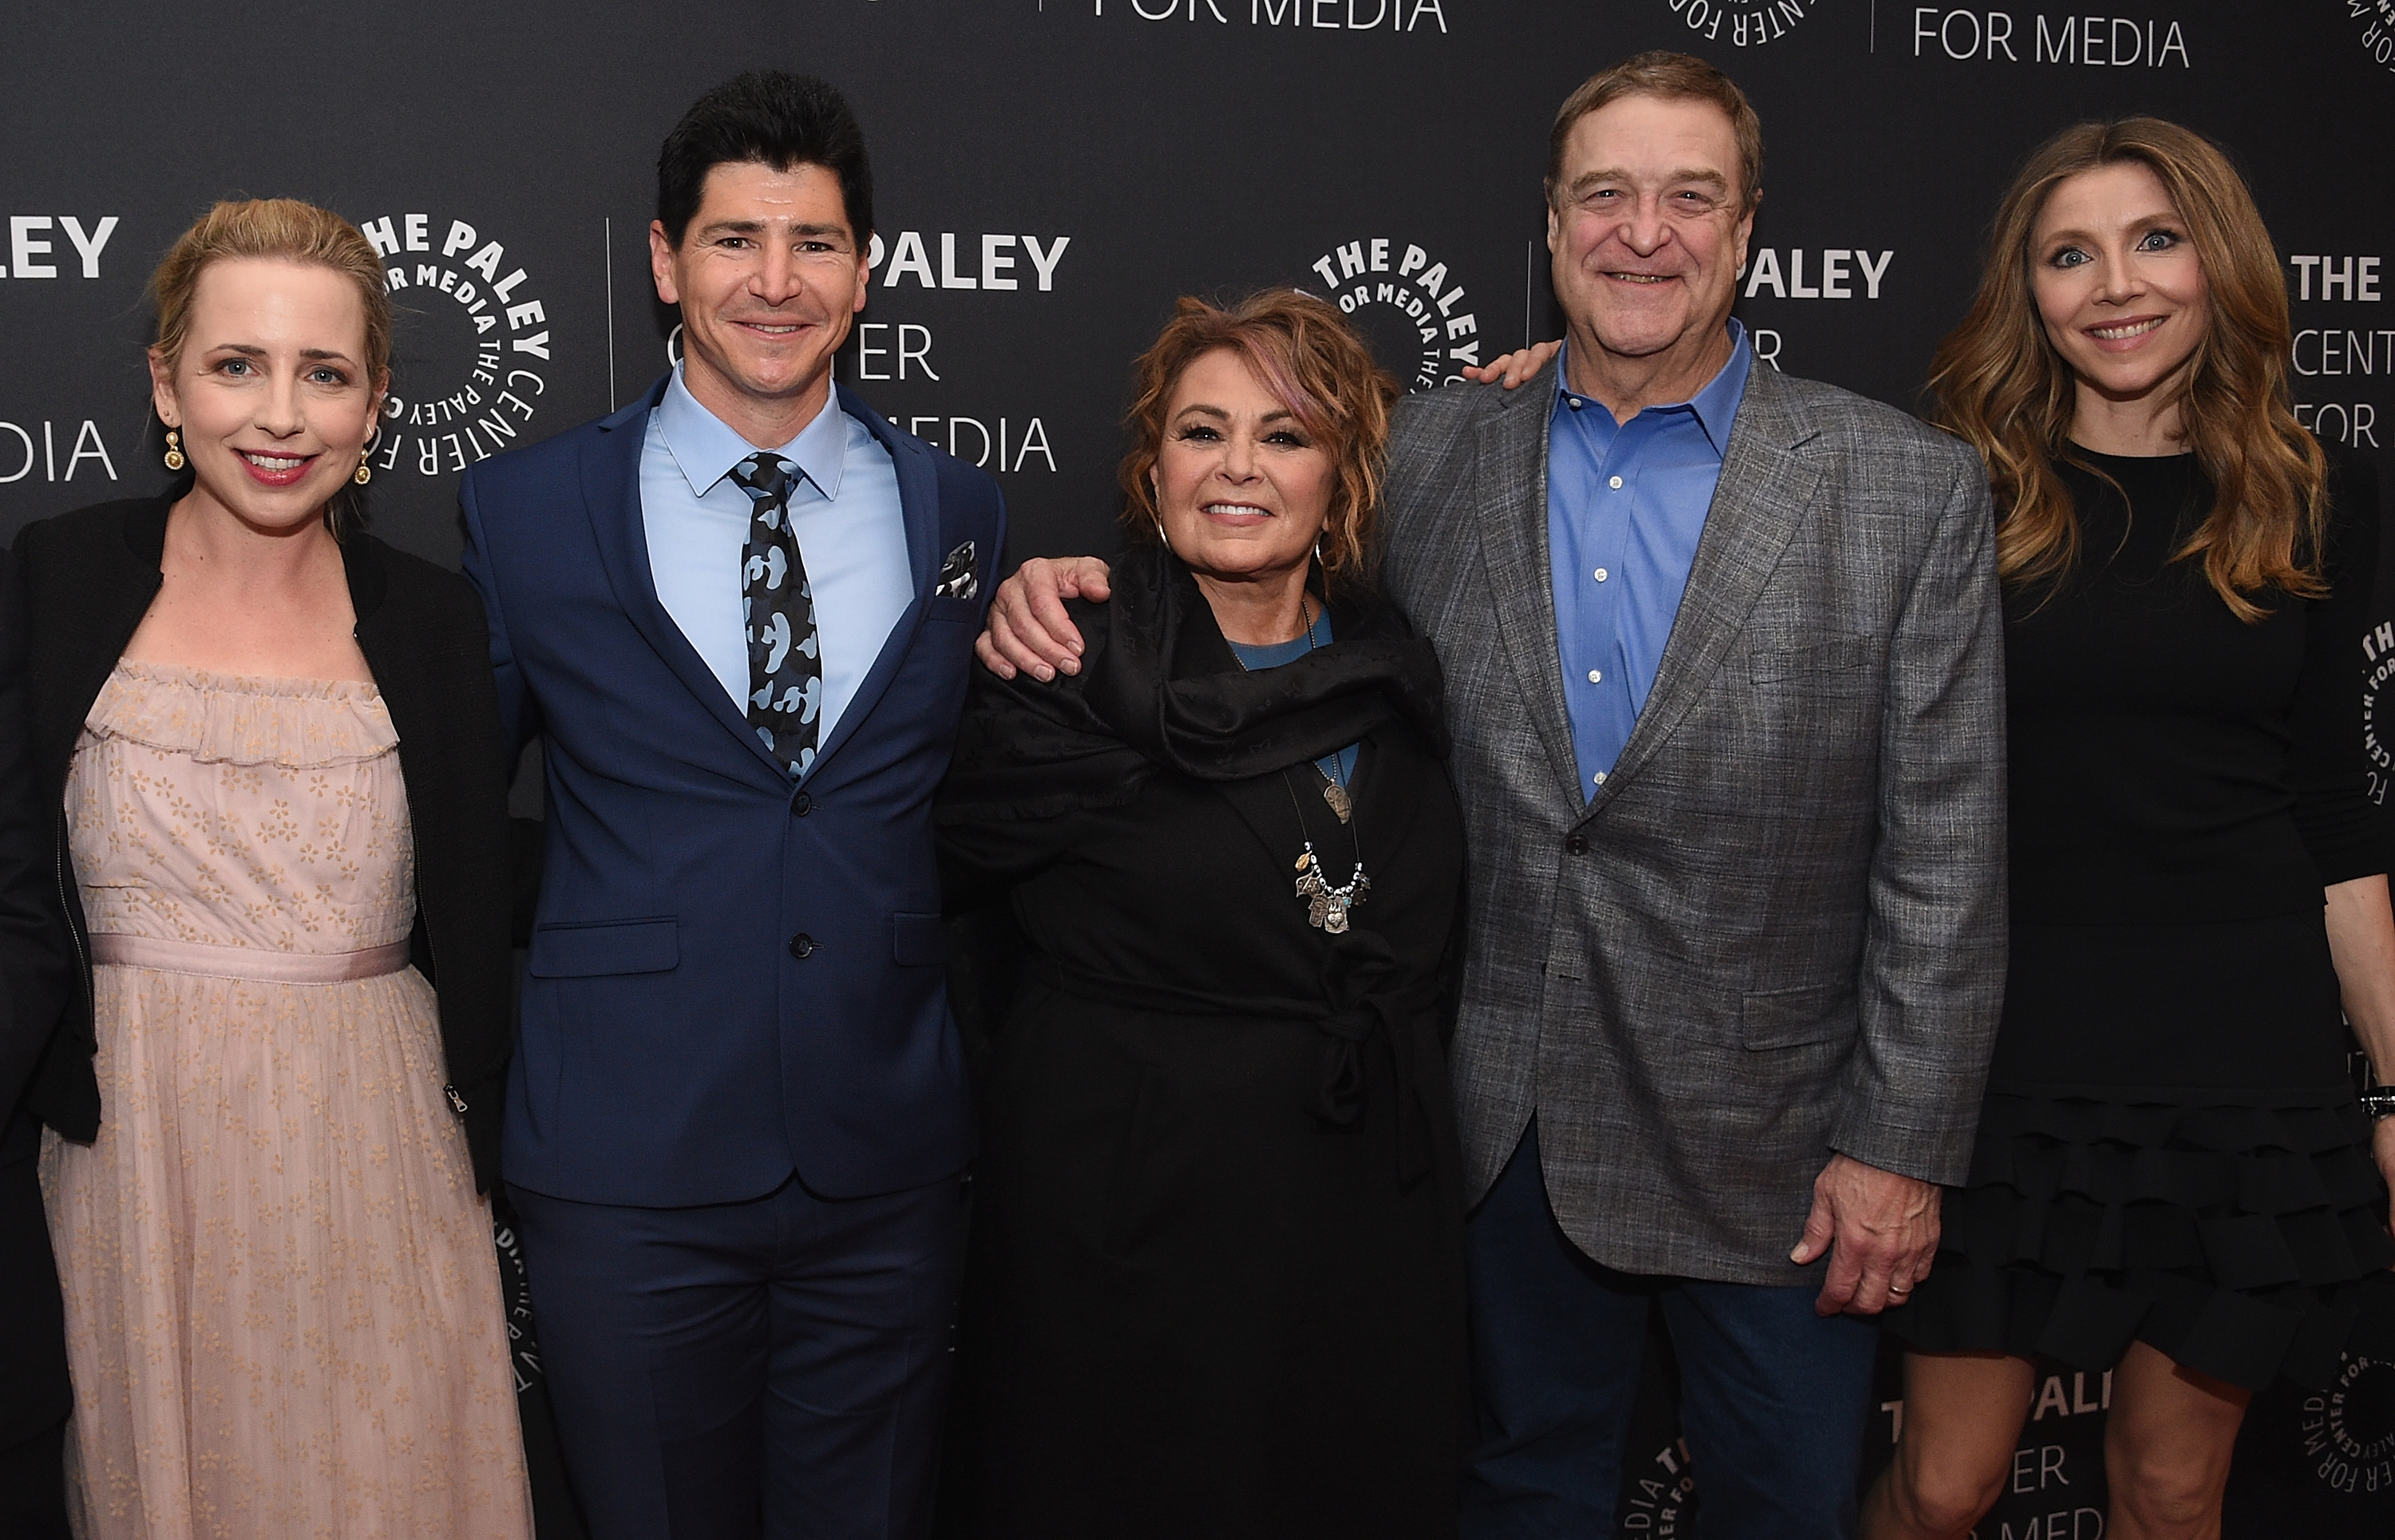 Lecy Goranson, Michael Fishman, Roseanne Barr, John Goodman and Sarah Chalke at An Evening With The Cast Of "Roseanne"on March 26, 2018 in New York City | Source: Getty Images